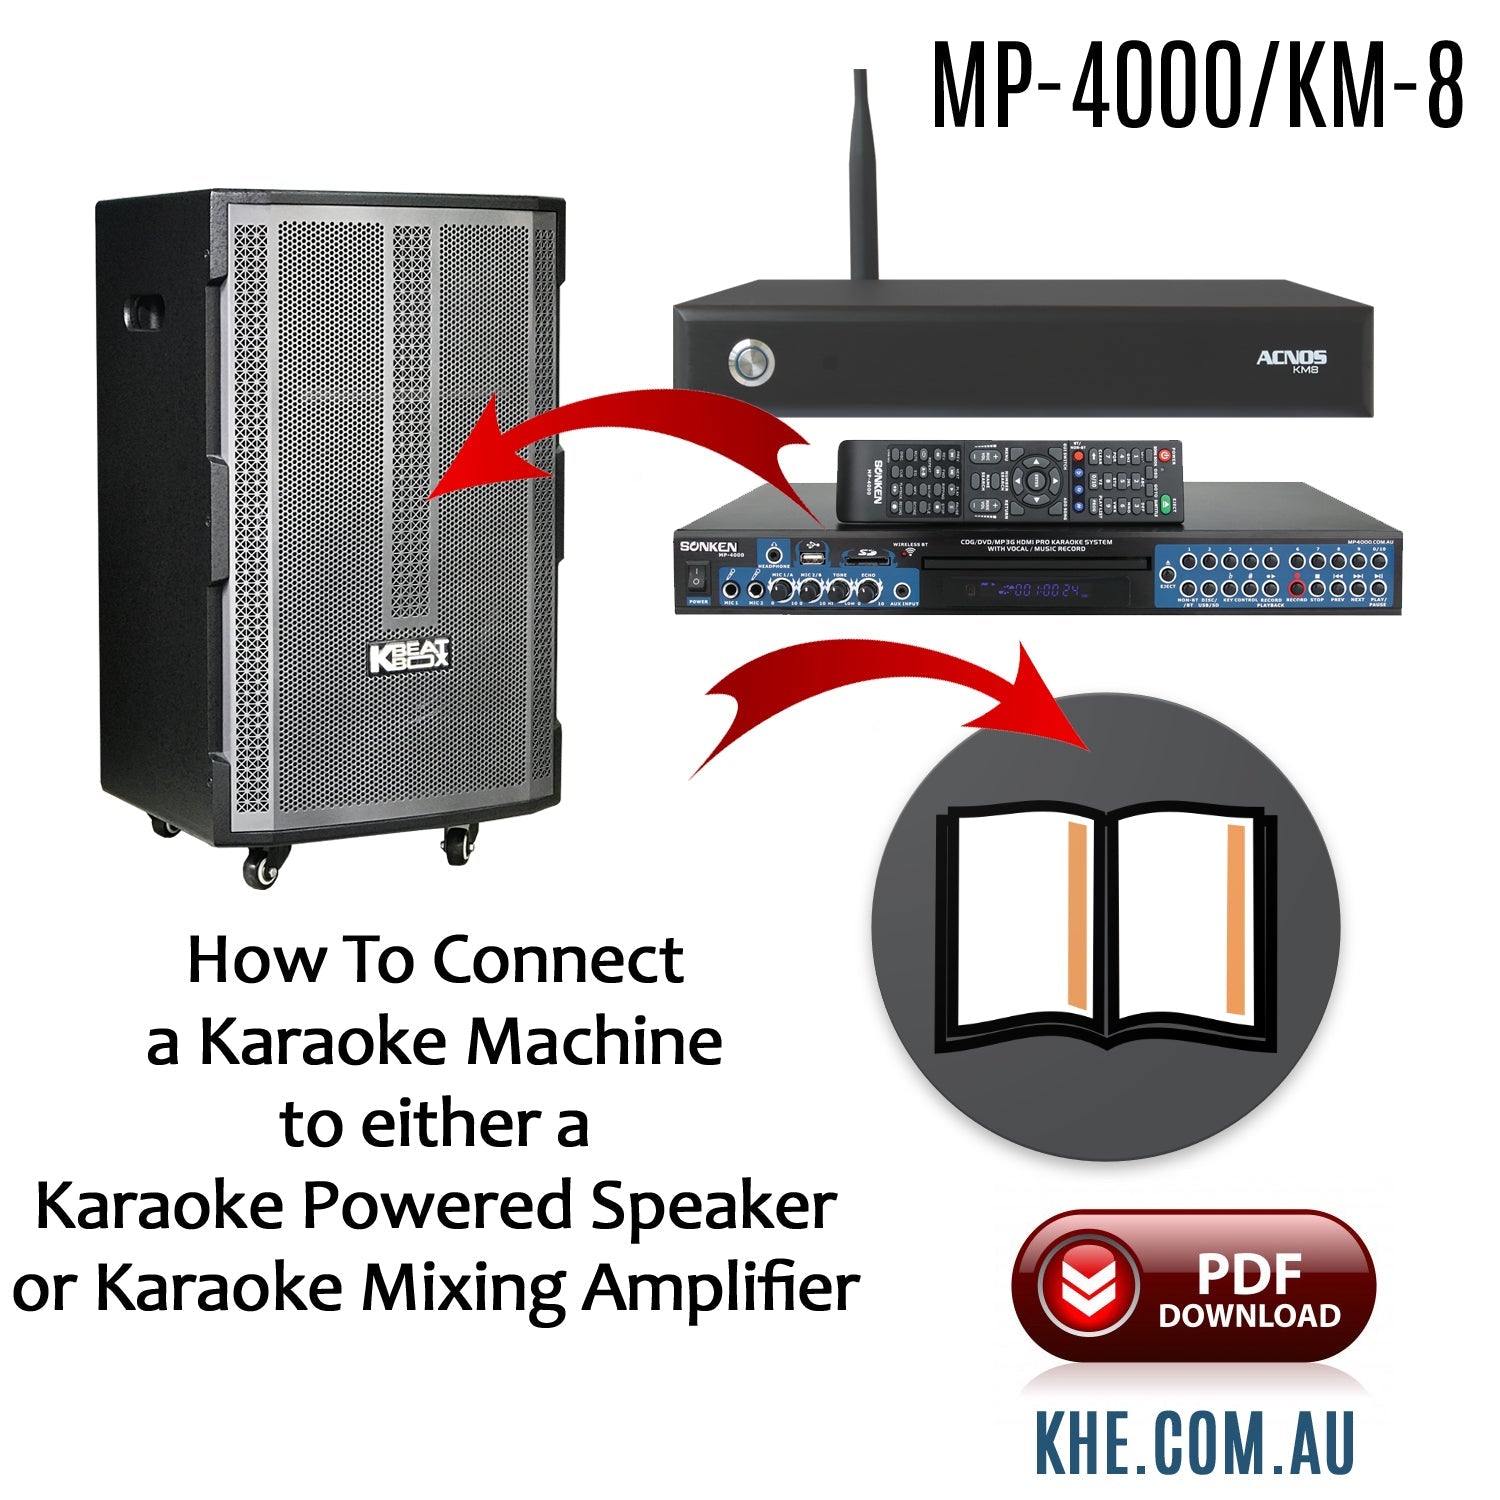 How To Connect Guide - Connecting Karaoke Machine to Powered Speaker or Amplifier - Karaoke Home Entertainment